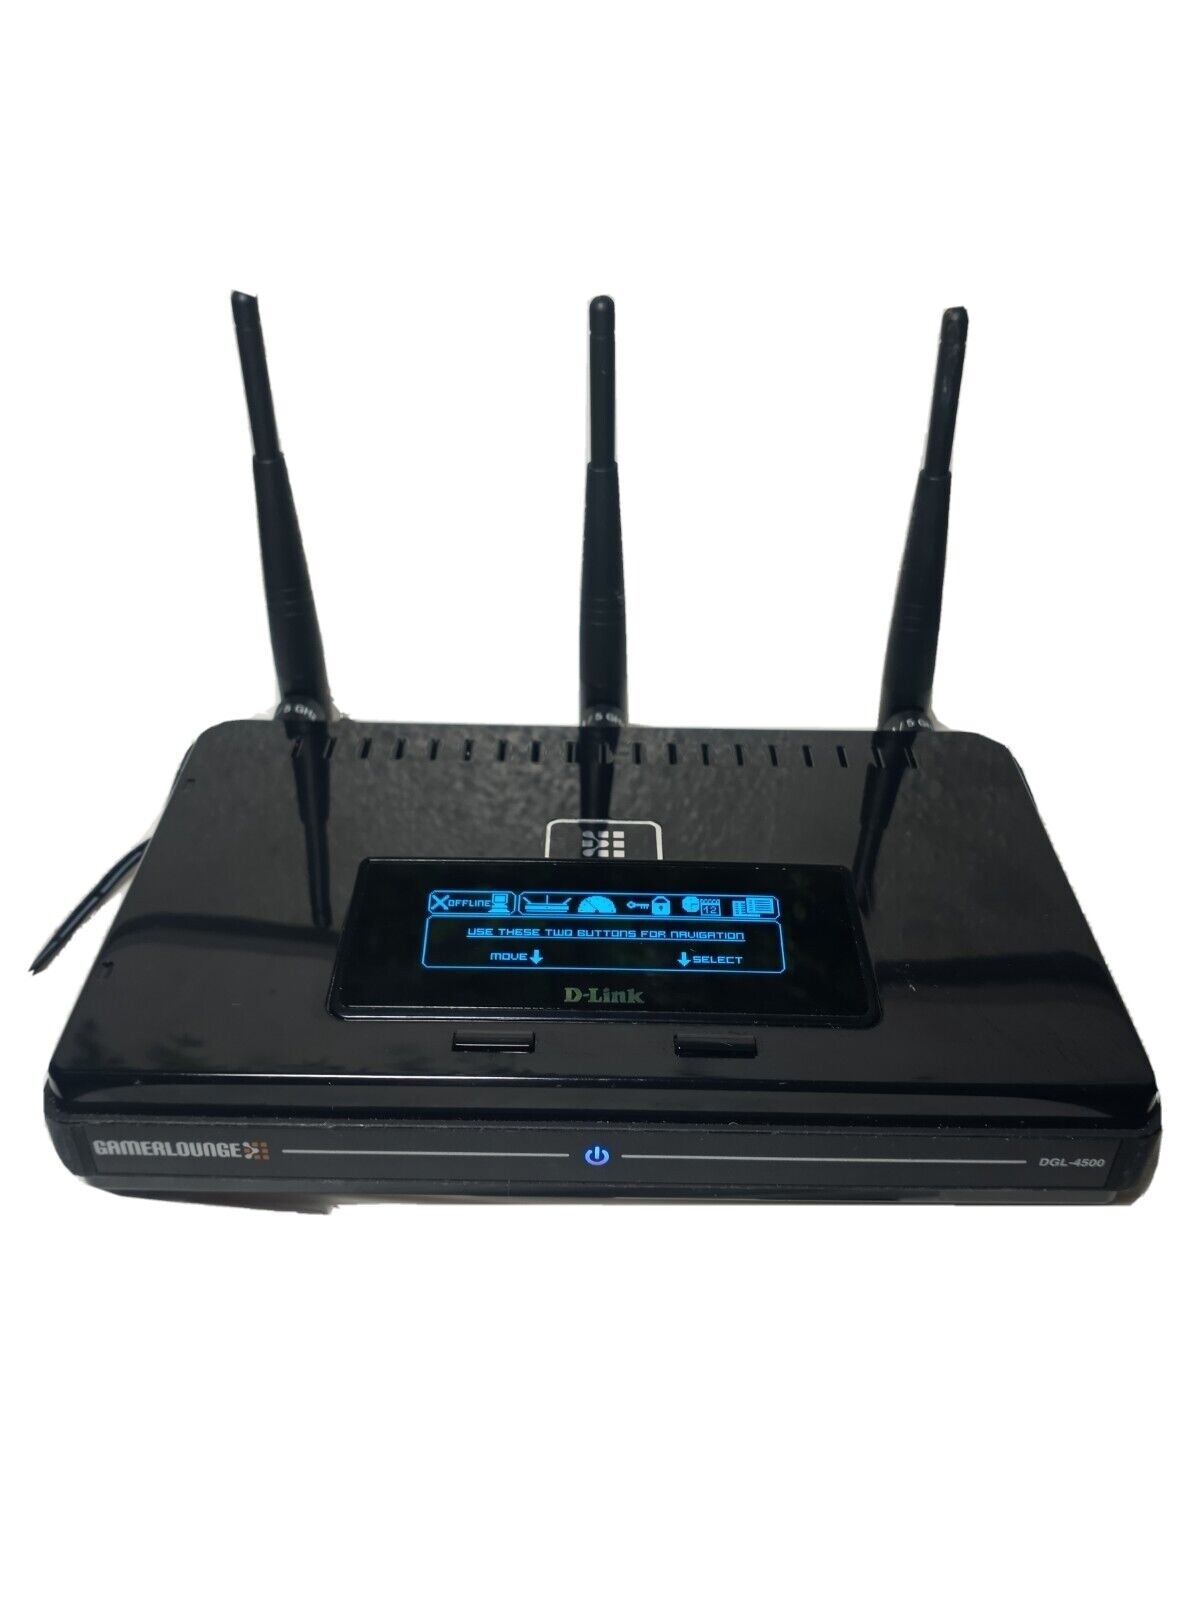 D-Link GamerLounge DGL-4500 54 4-Port 10/100 Gaming Router Wi-Fi Wireless